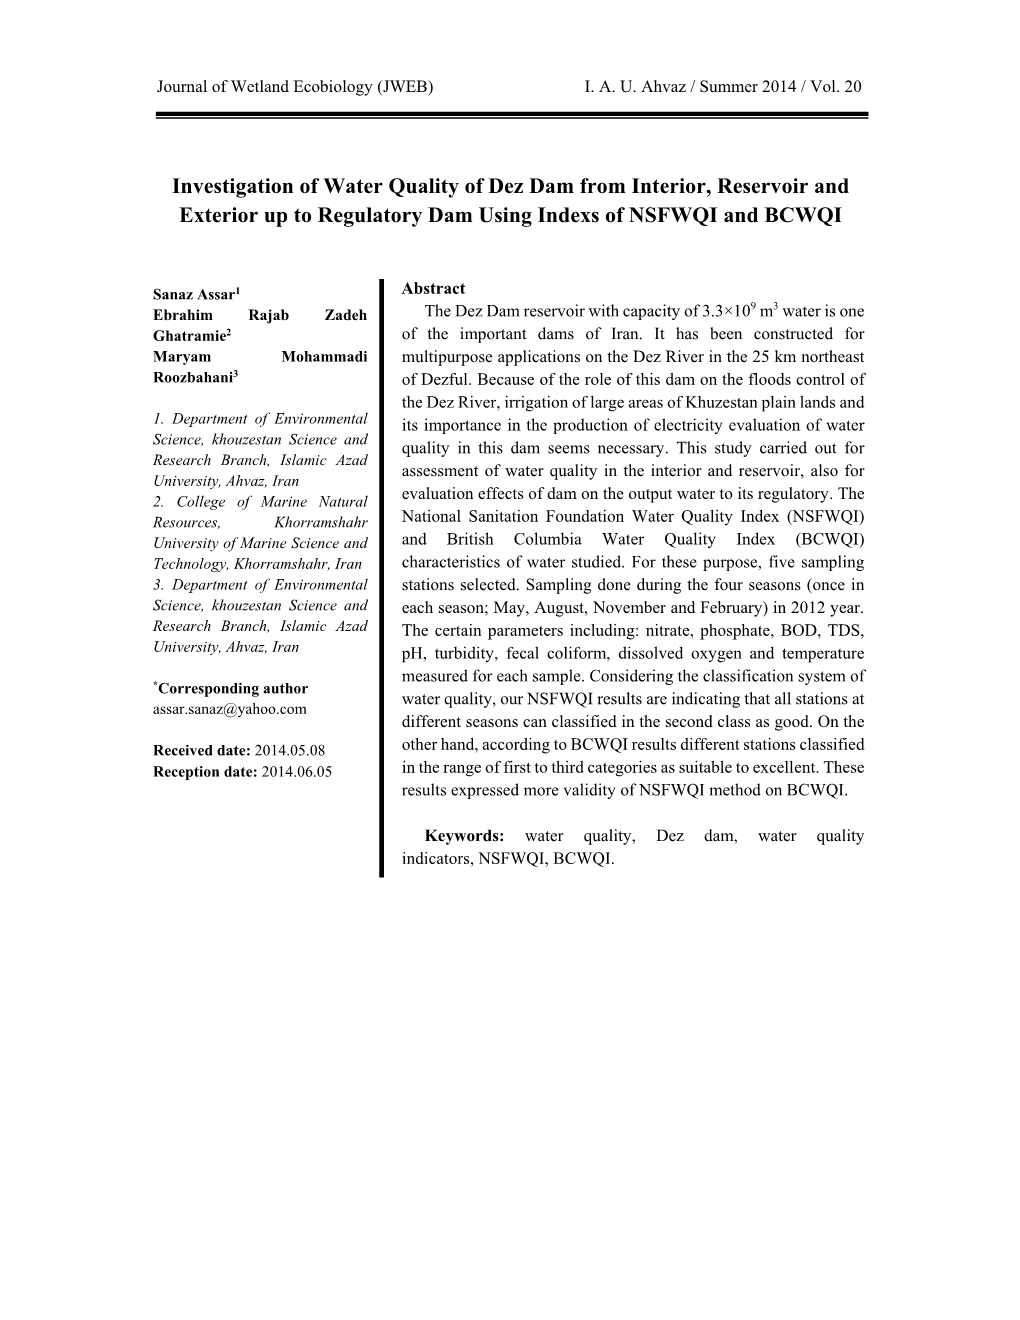 Investigation of Water Quality of Dez Dam from Interior, Reservoir and Exterior up to Regulatory Dam Using Indexs of NSFWQI and BCWQI